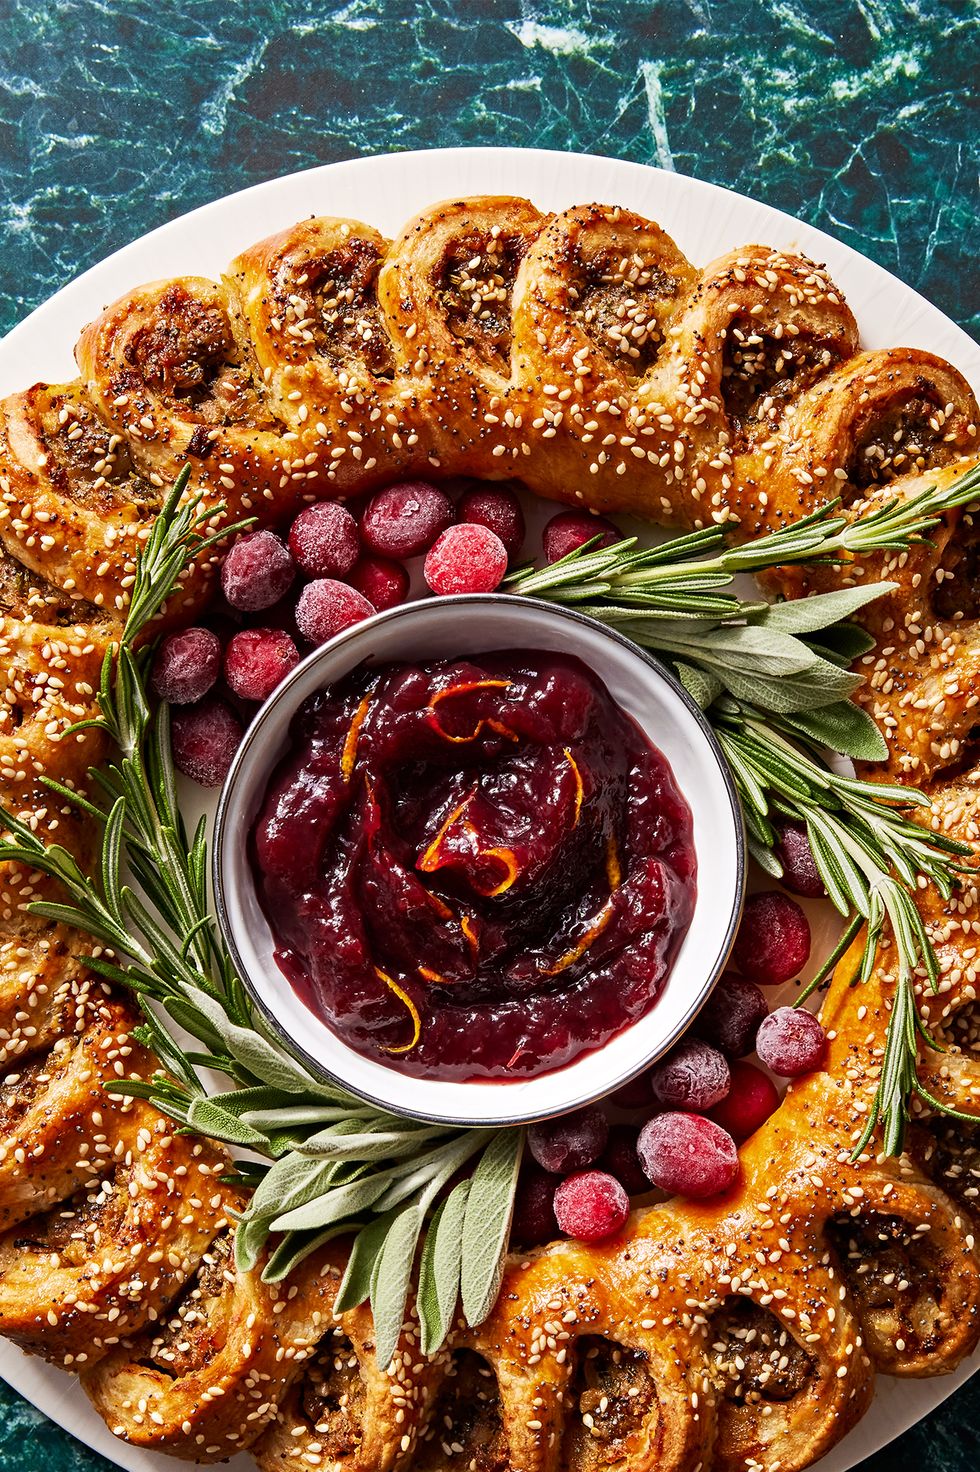 6 Easy Christmas Dinner Ideas that Will Get Your Guests Talking